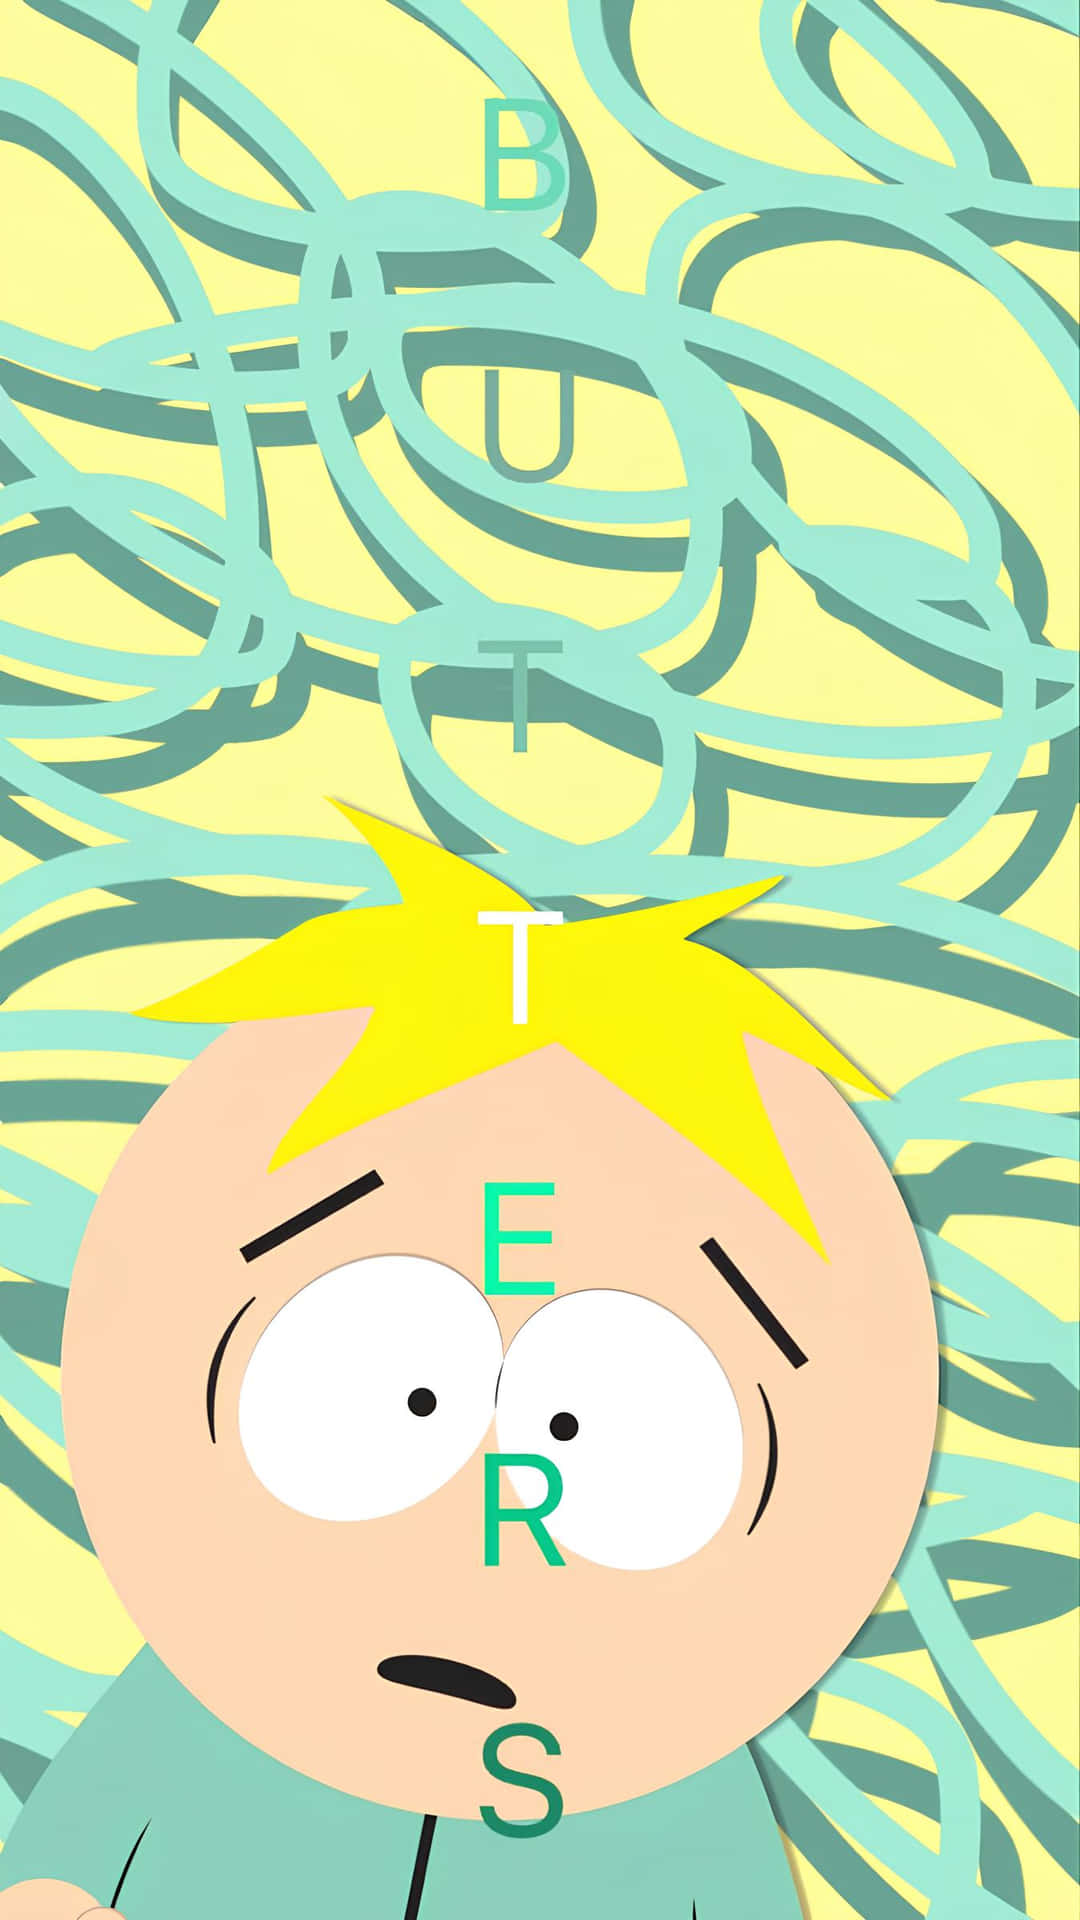 Butters Stotch South Park Character Wallpaper